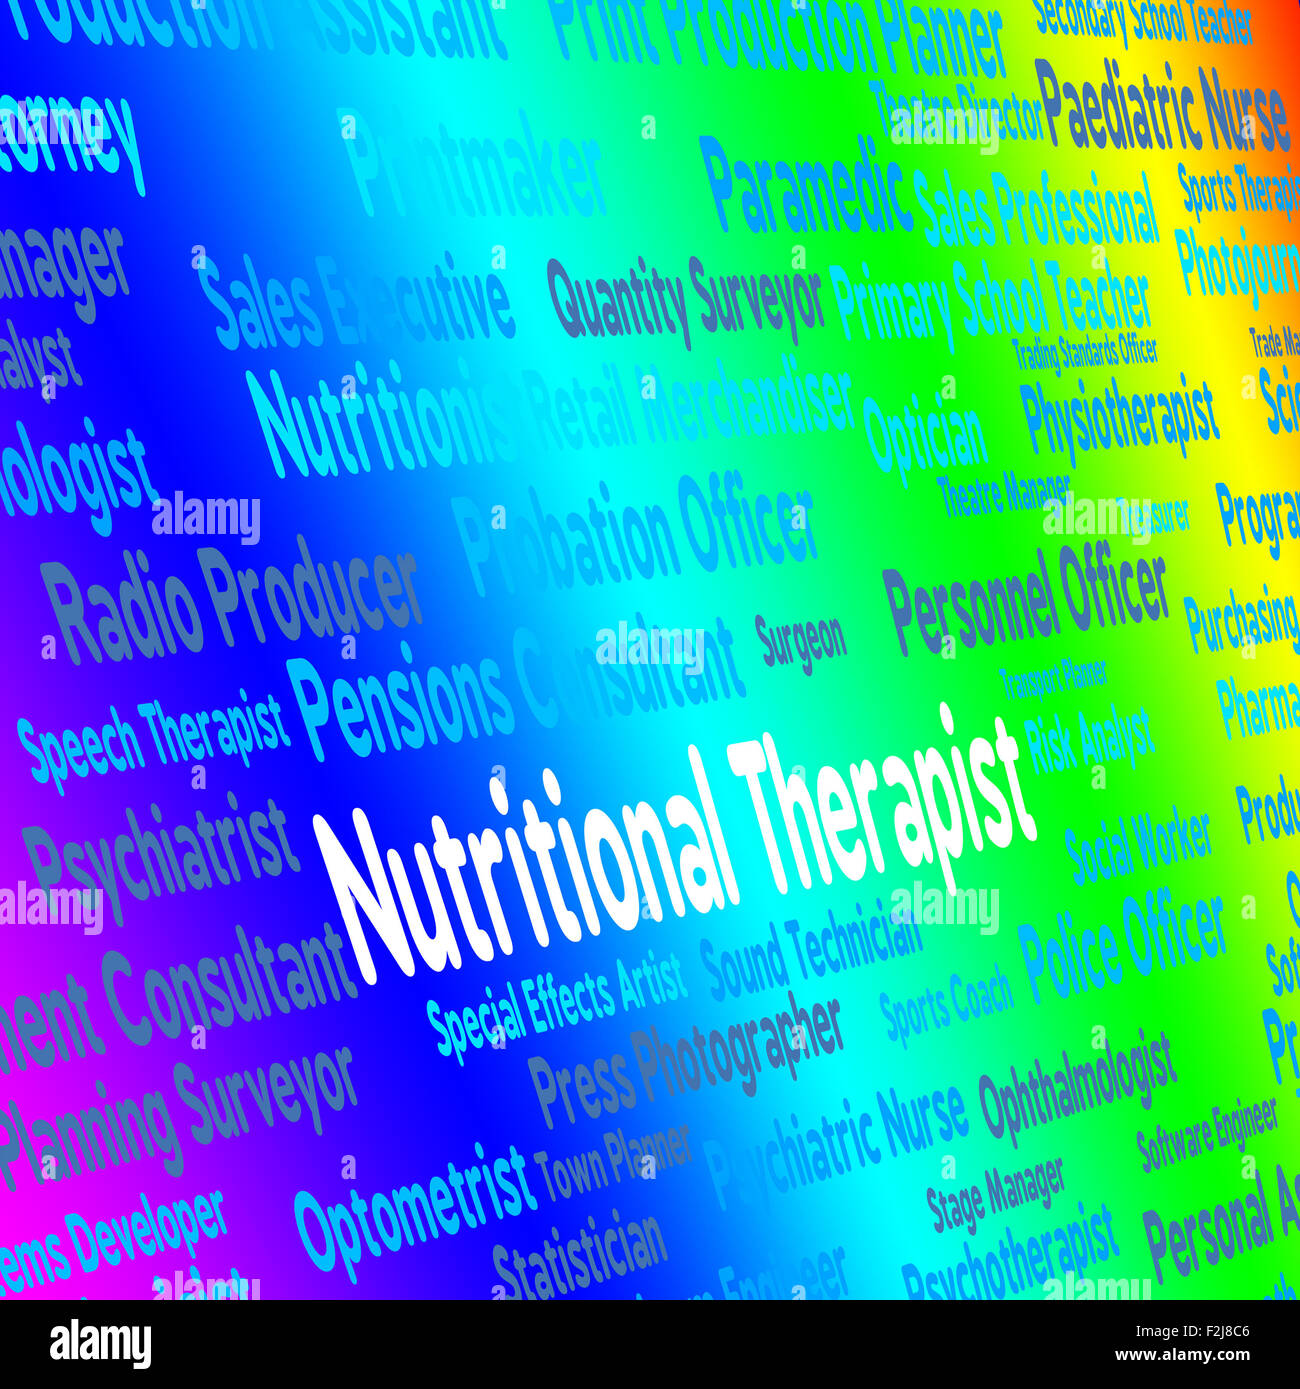 Nutritional Therapist Showing Nutrients Words And Hiring Stock Photo